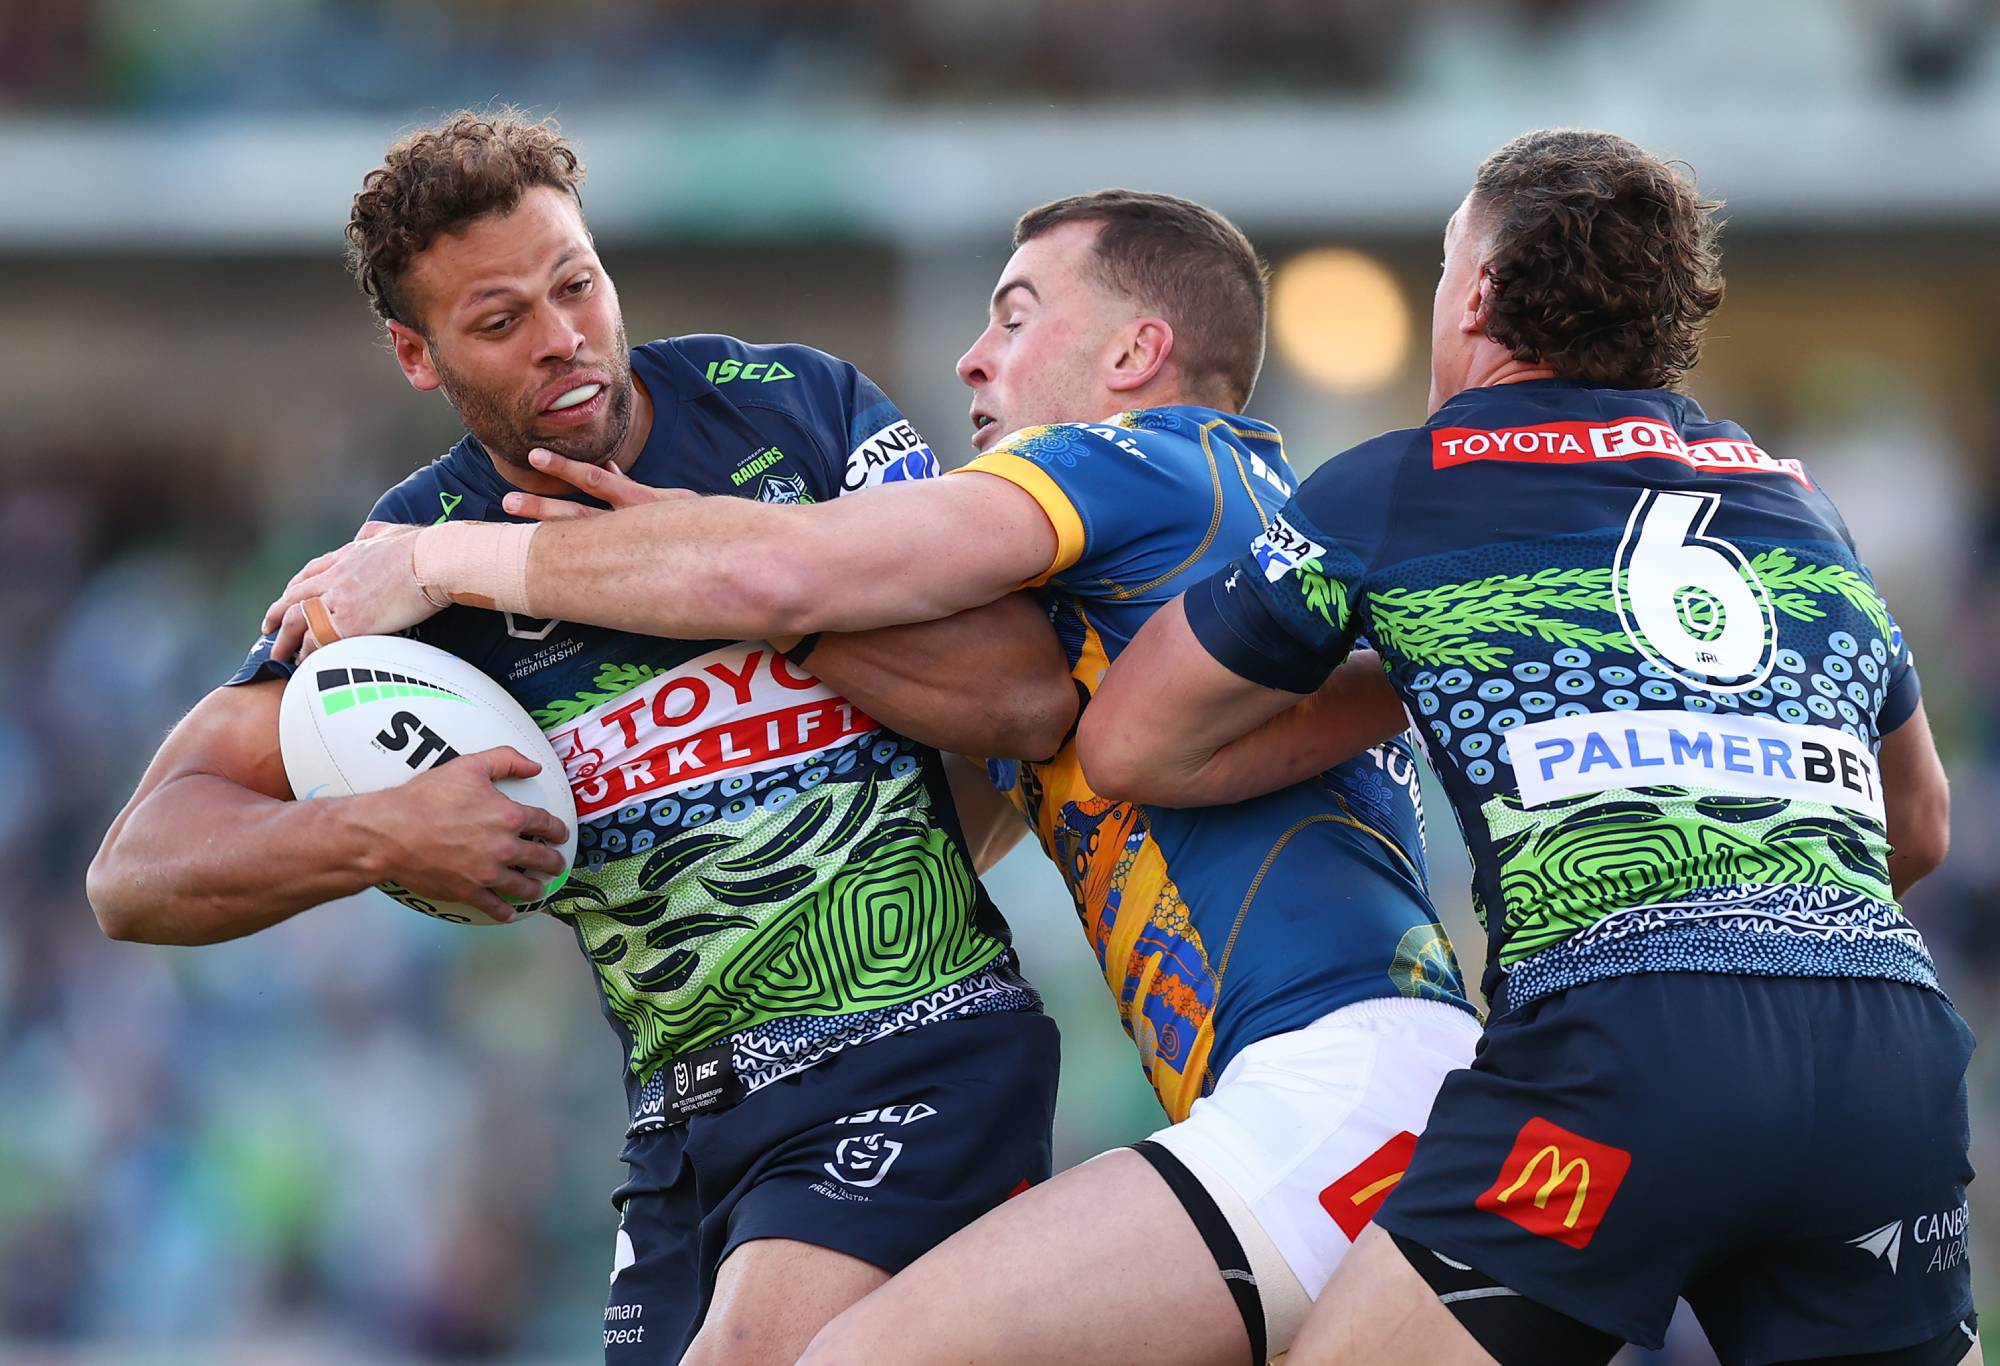 CANBERRA, AUSTRALIA - MAY 29: Sebastian Kris of the Raiders is tackled during the round 12 NRL match between the Canberra Raiders and the Parramatta Eels at GIO Stadium, on May 29, 2022, in Canberra, Australia. (Photo by Mark Nolan/Getty Images)